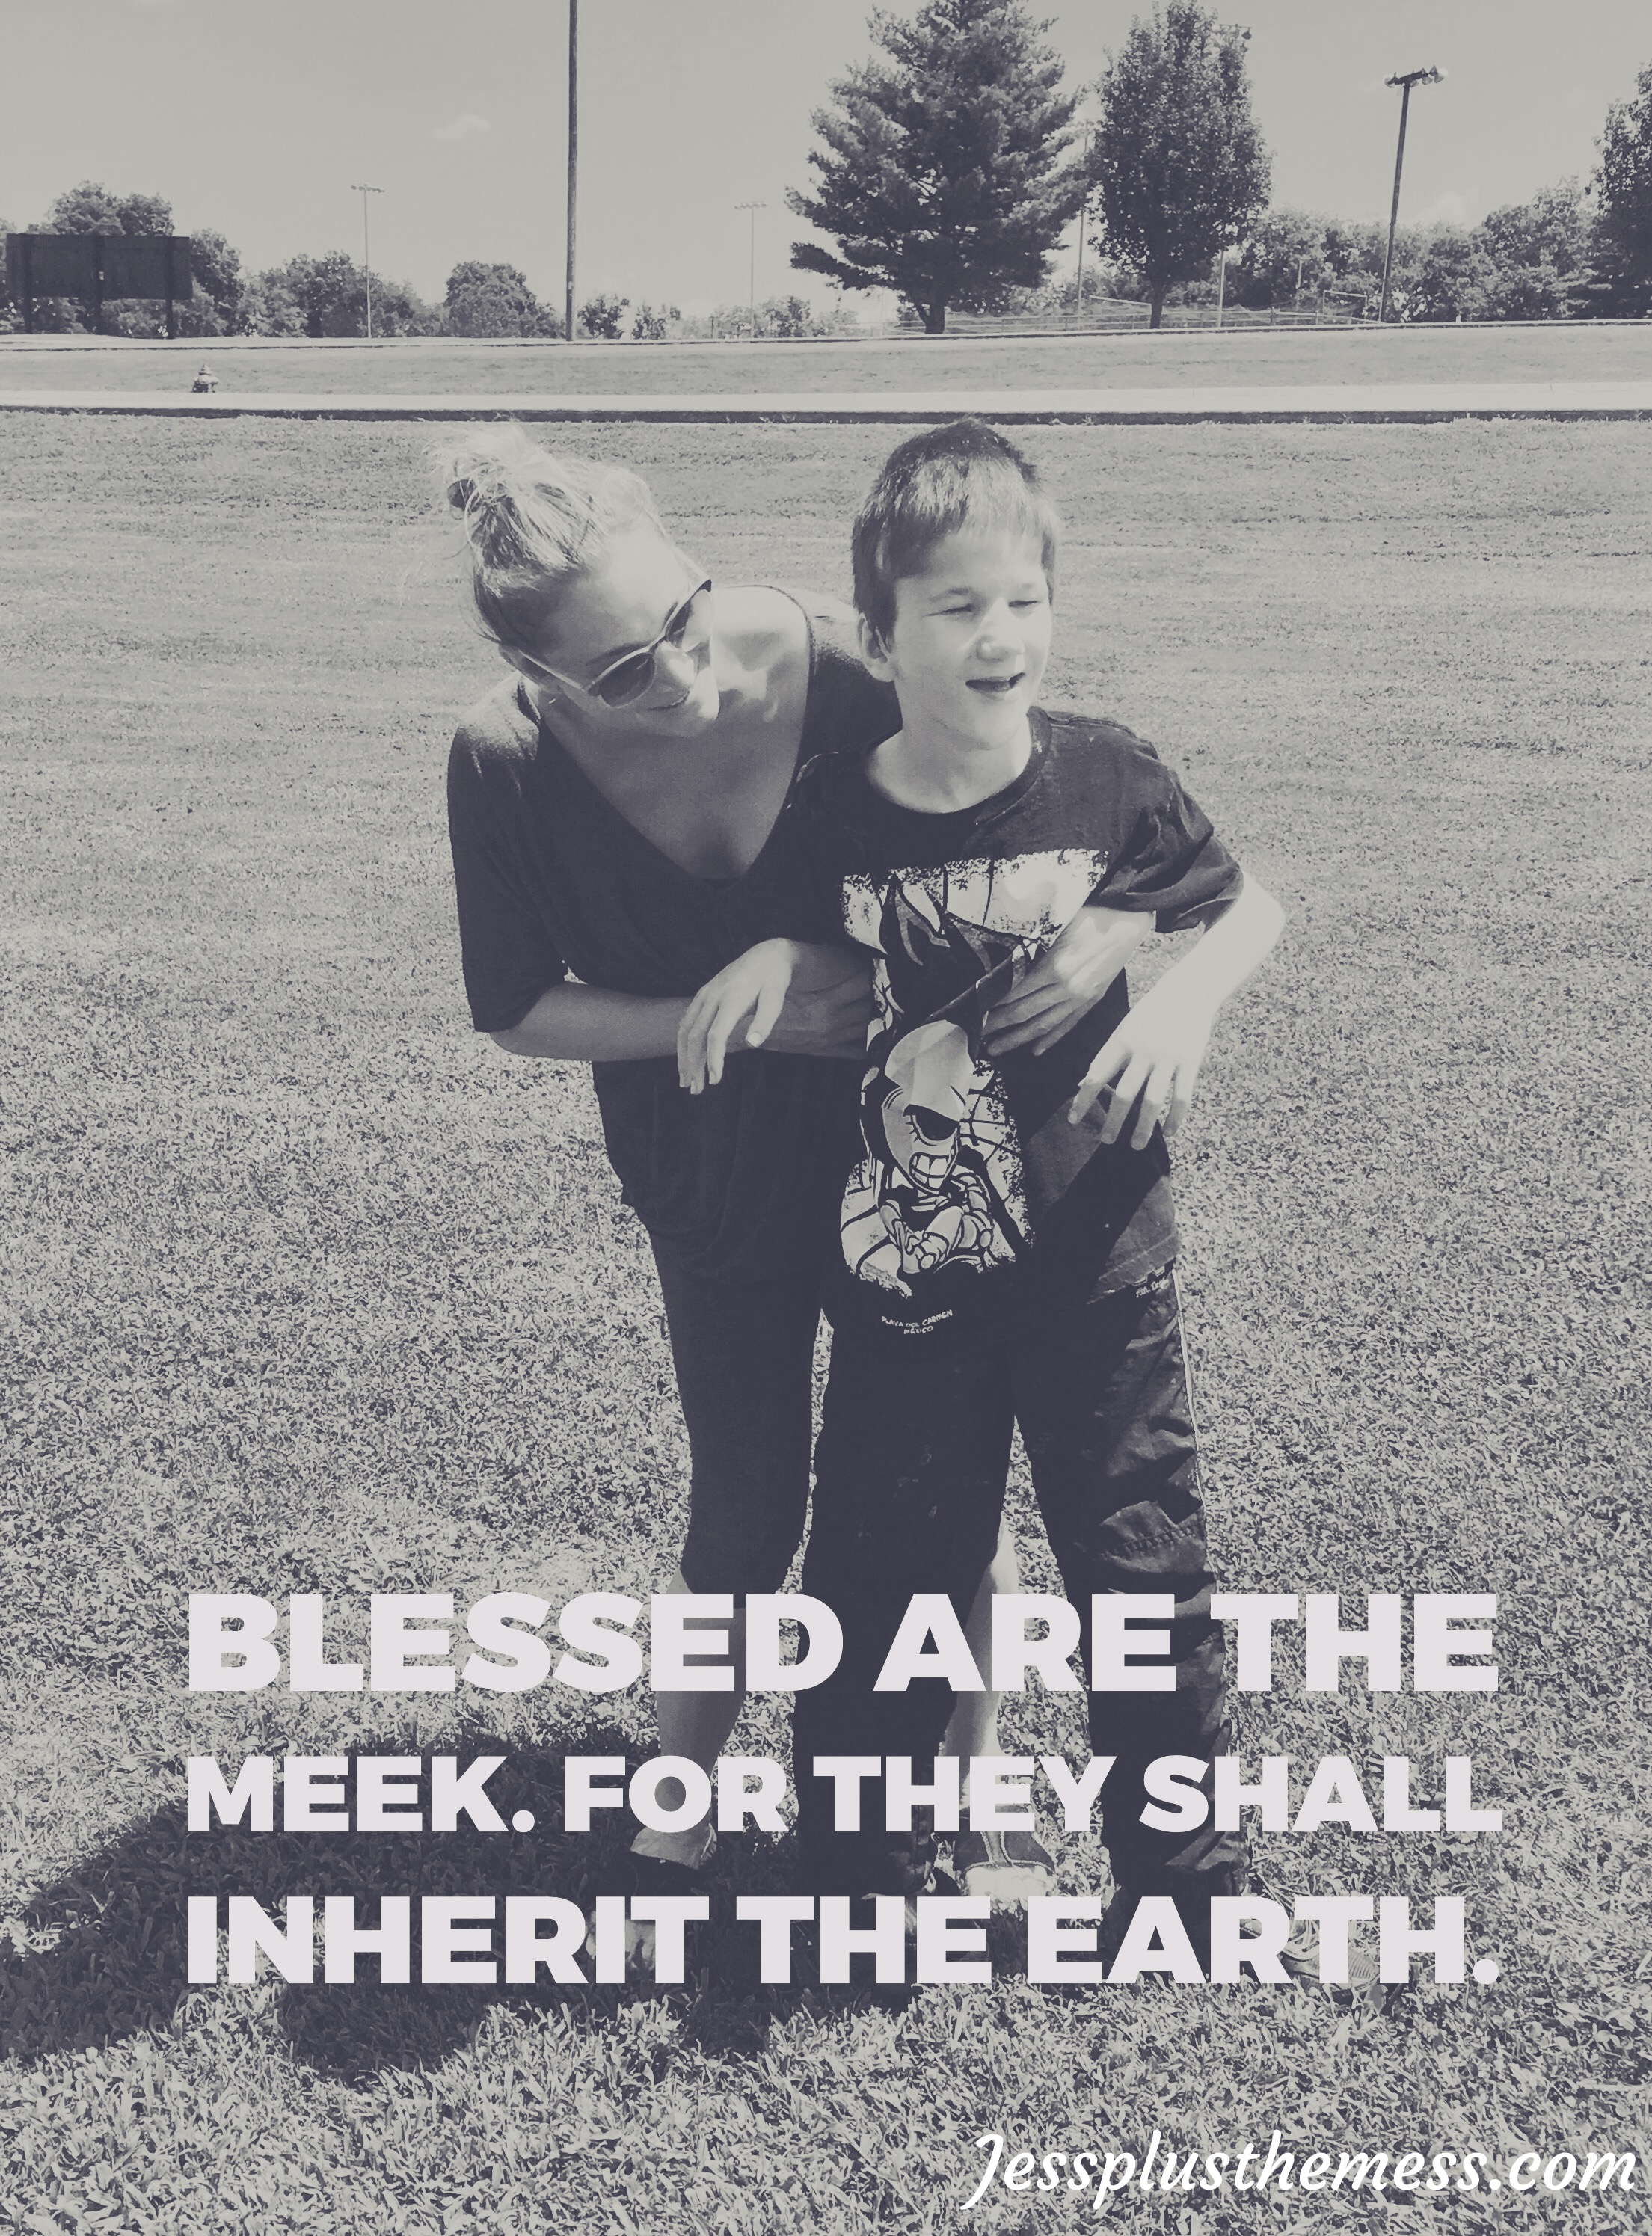 Blessed Are the Meek